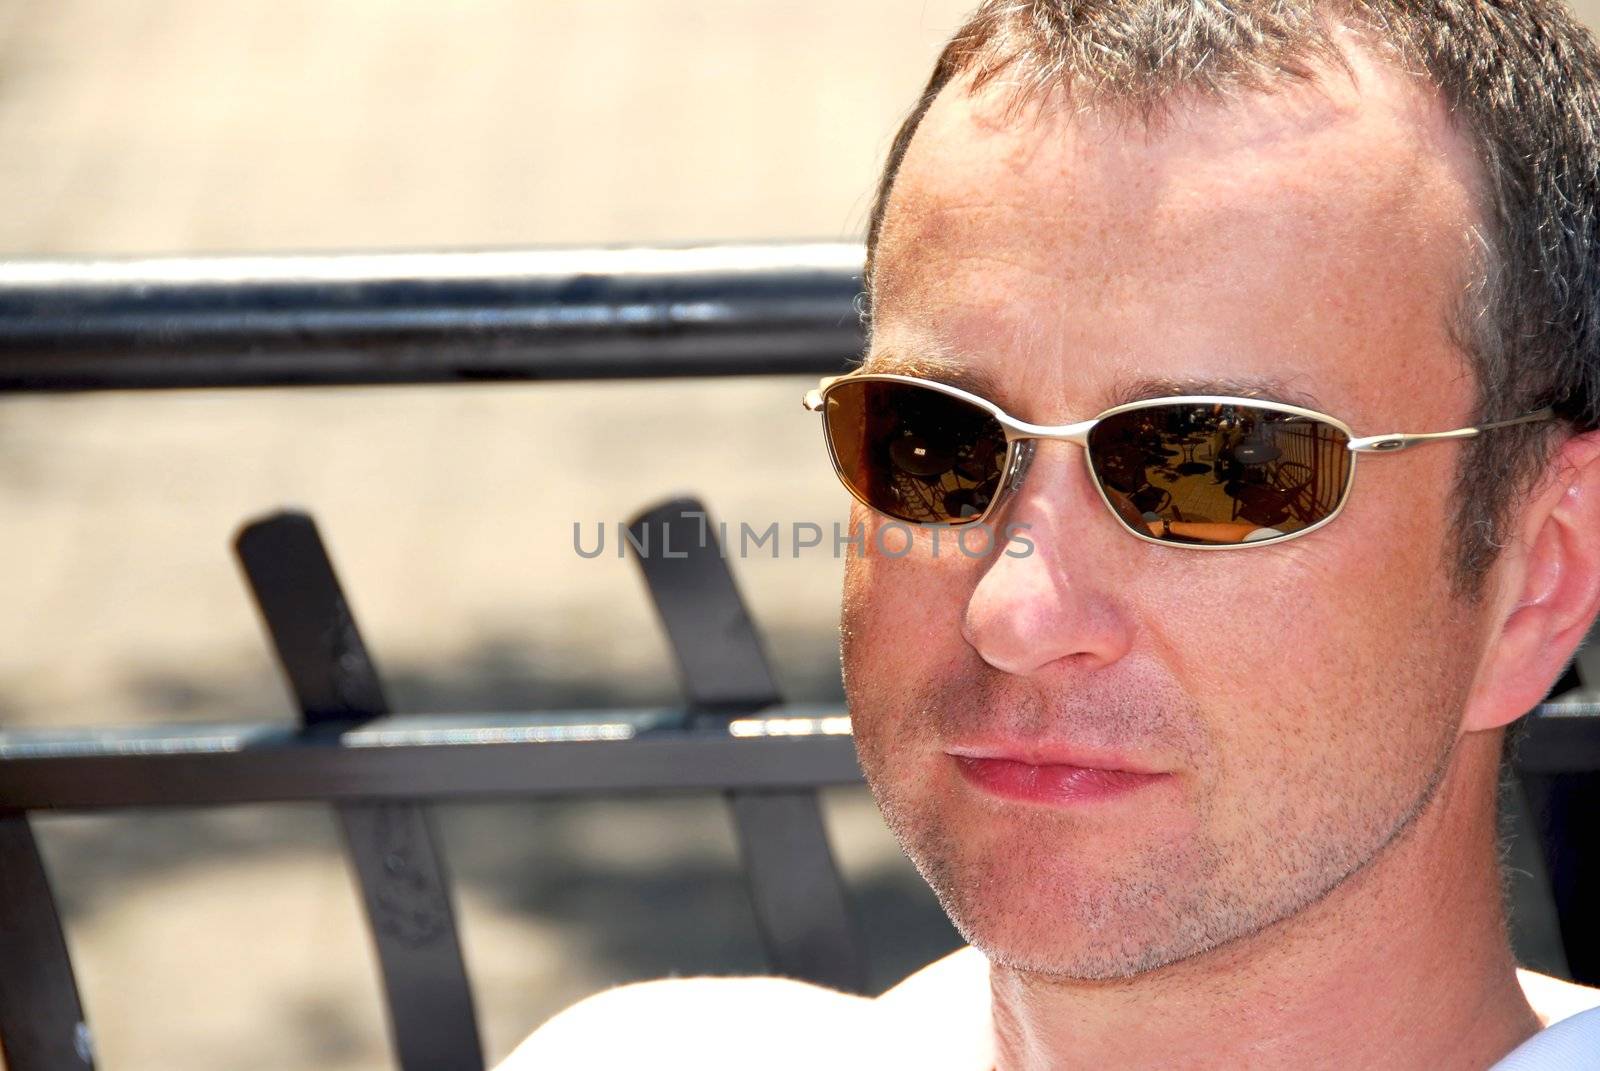 Portrait of a man wearing sunglasses in outdoor cafe